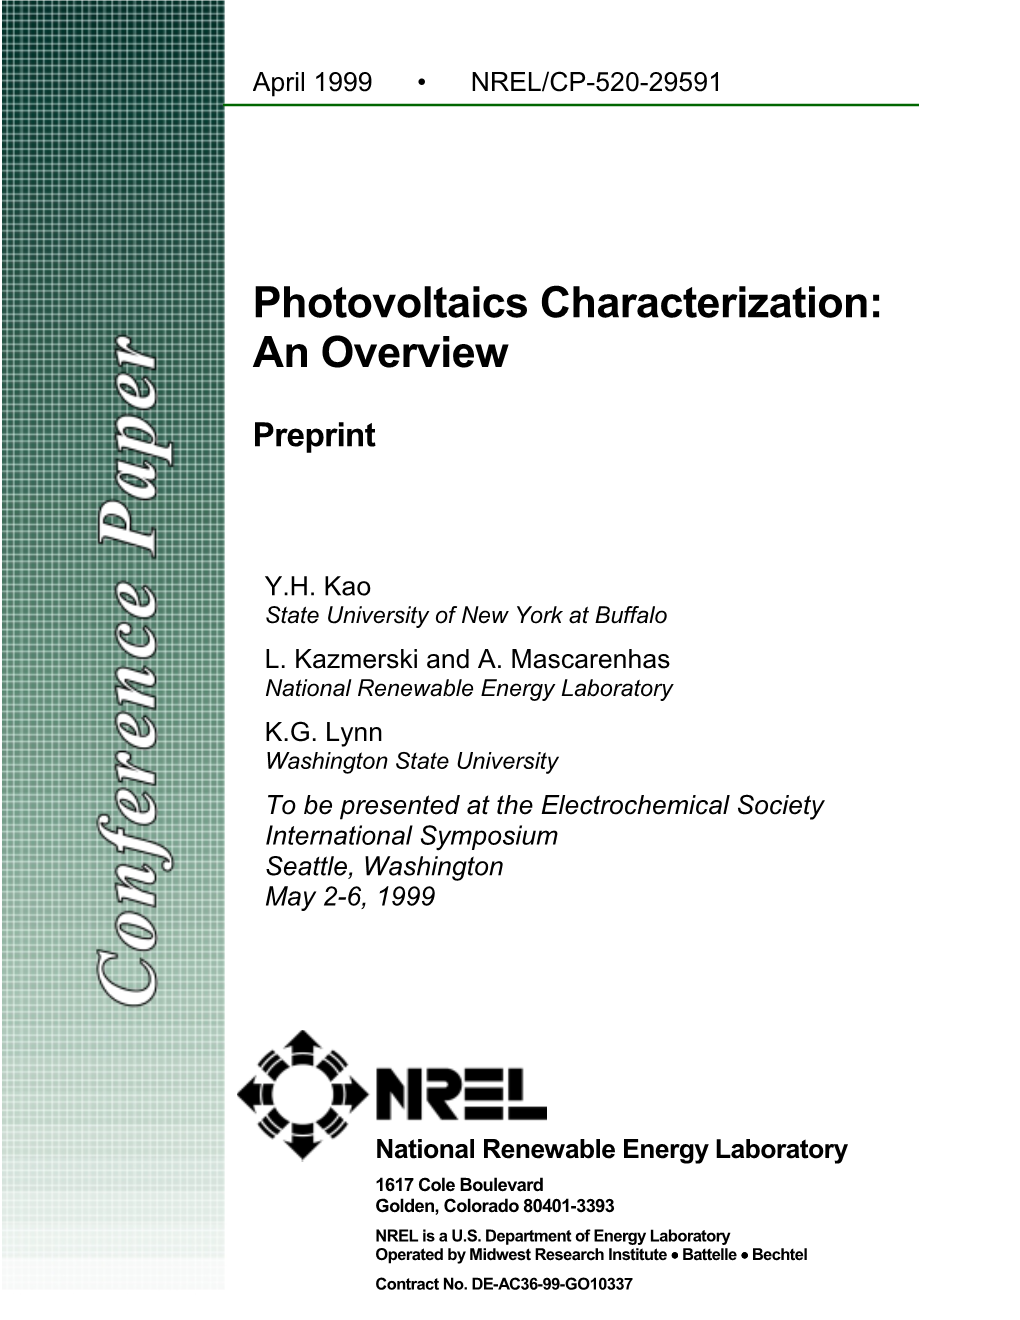 Photovoltaics Characterization: an Overview; Preprint